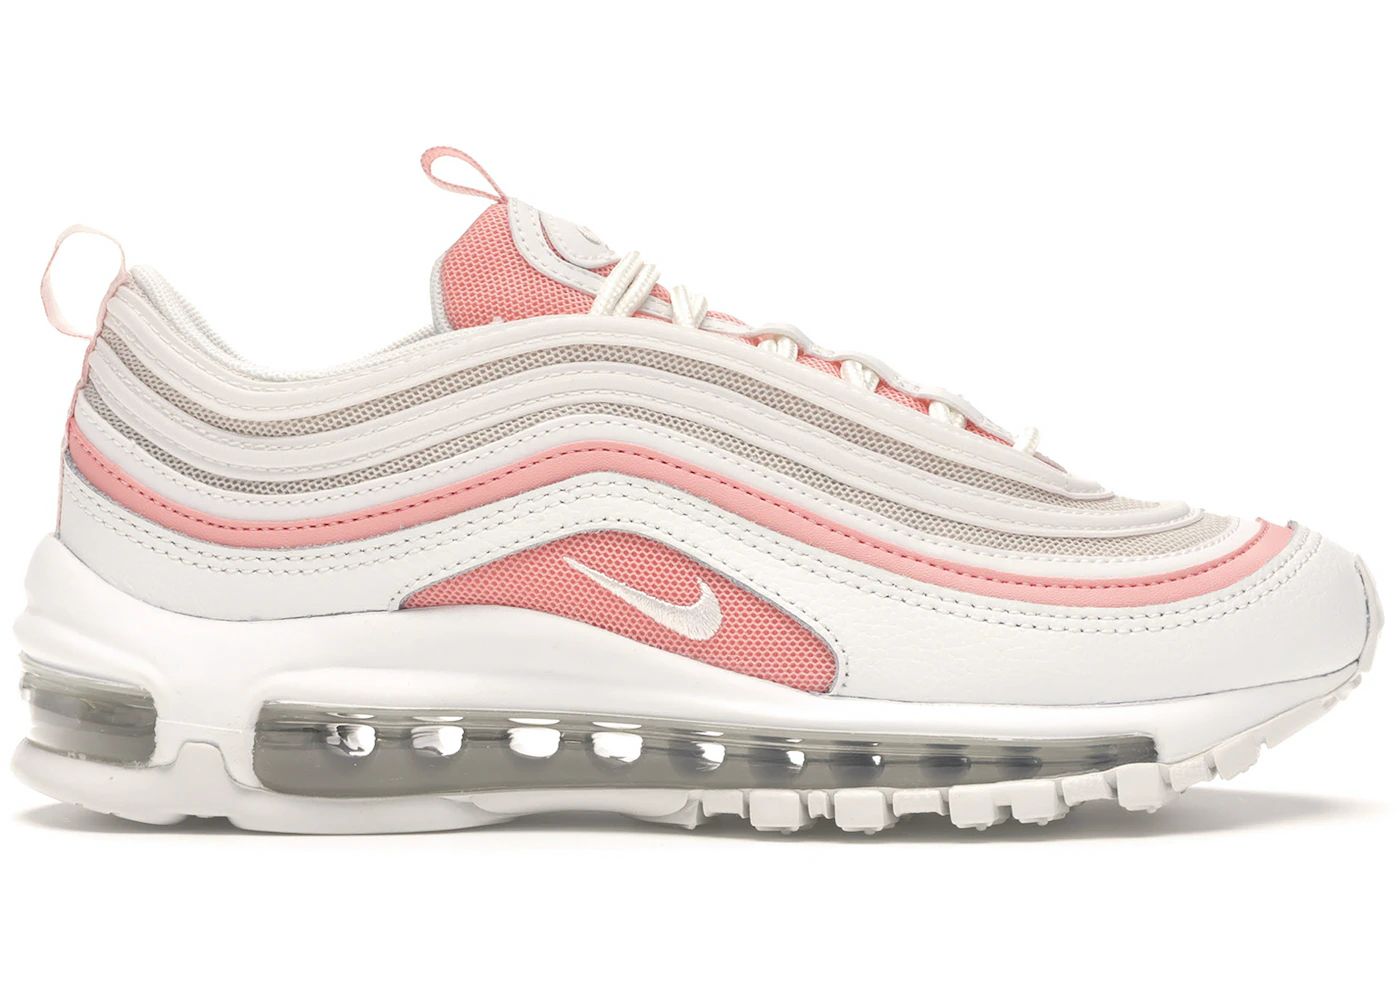 Nike Air Max 97 Summit White Bleached Coral (Women's) | StockX